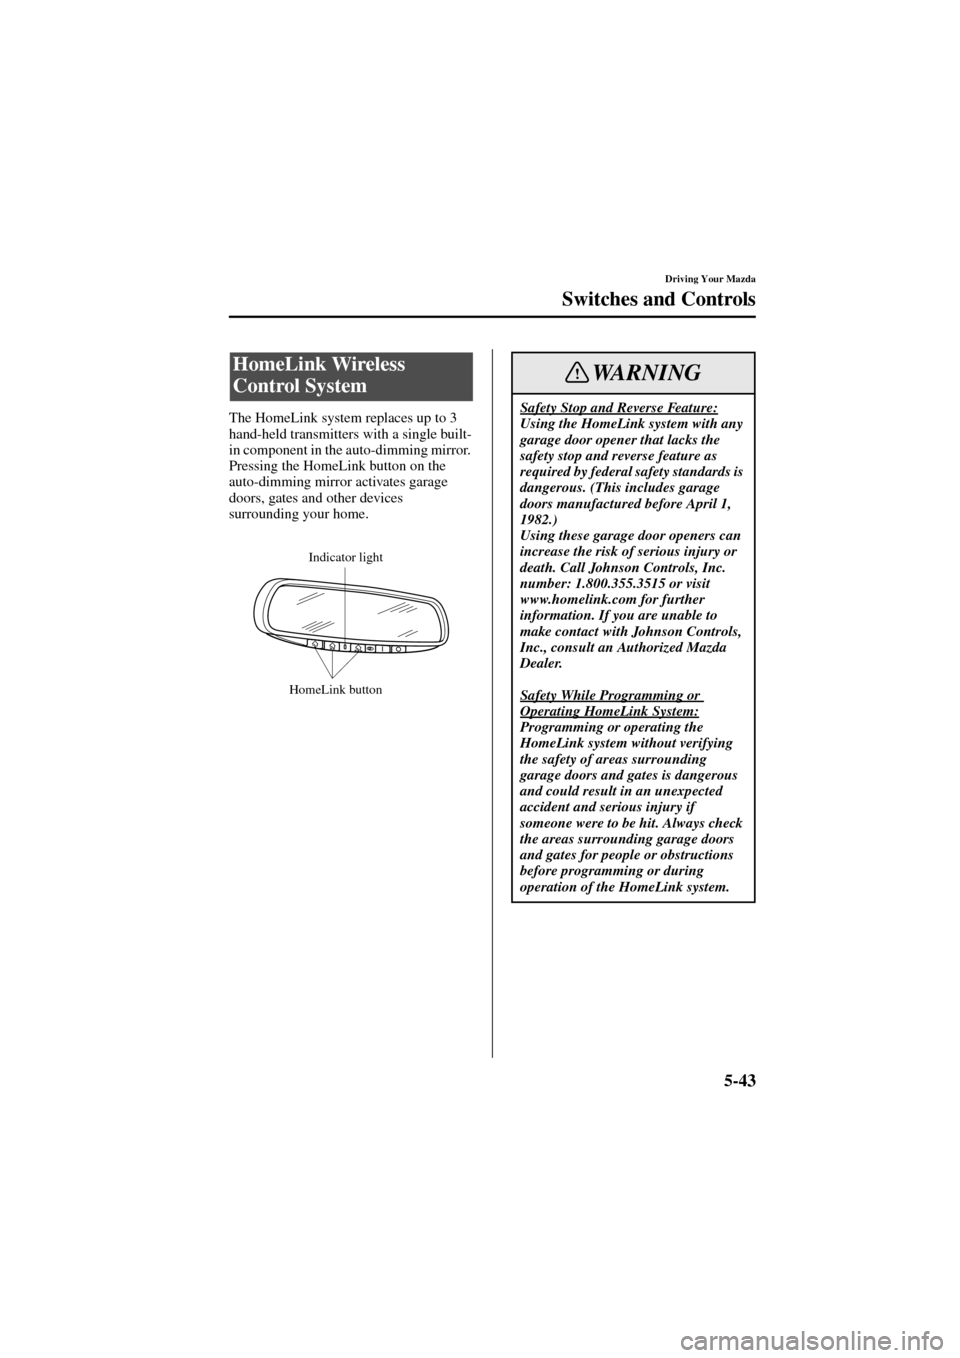 MAZDA MODEL 6 2004  Owners Manual (in English) 5-43
Driving Your Mazda
Switches and Controls
Form No. 8R29-EA-02I
The HomeLink system replaces up to 3 
hand-held transmitters with a single built-
in component in the auto-dimming mirror. 
Pressing 